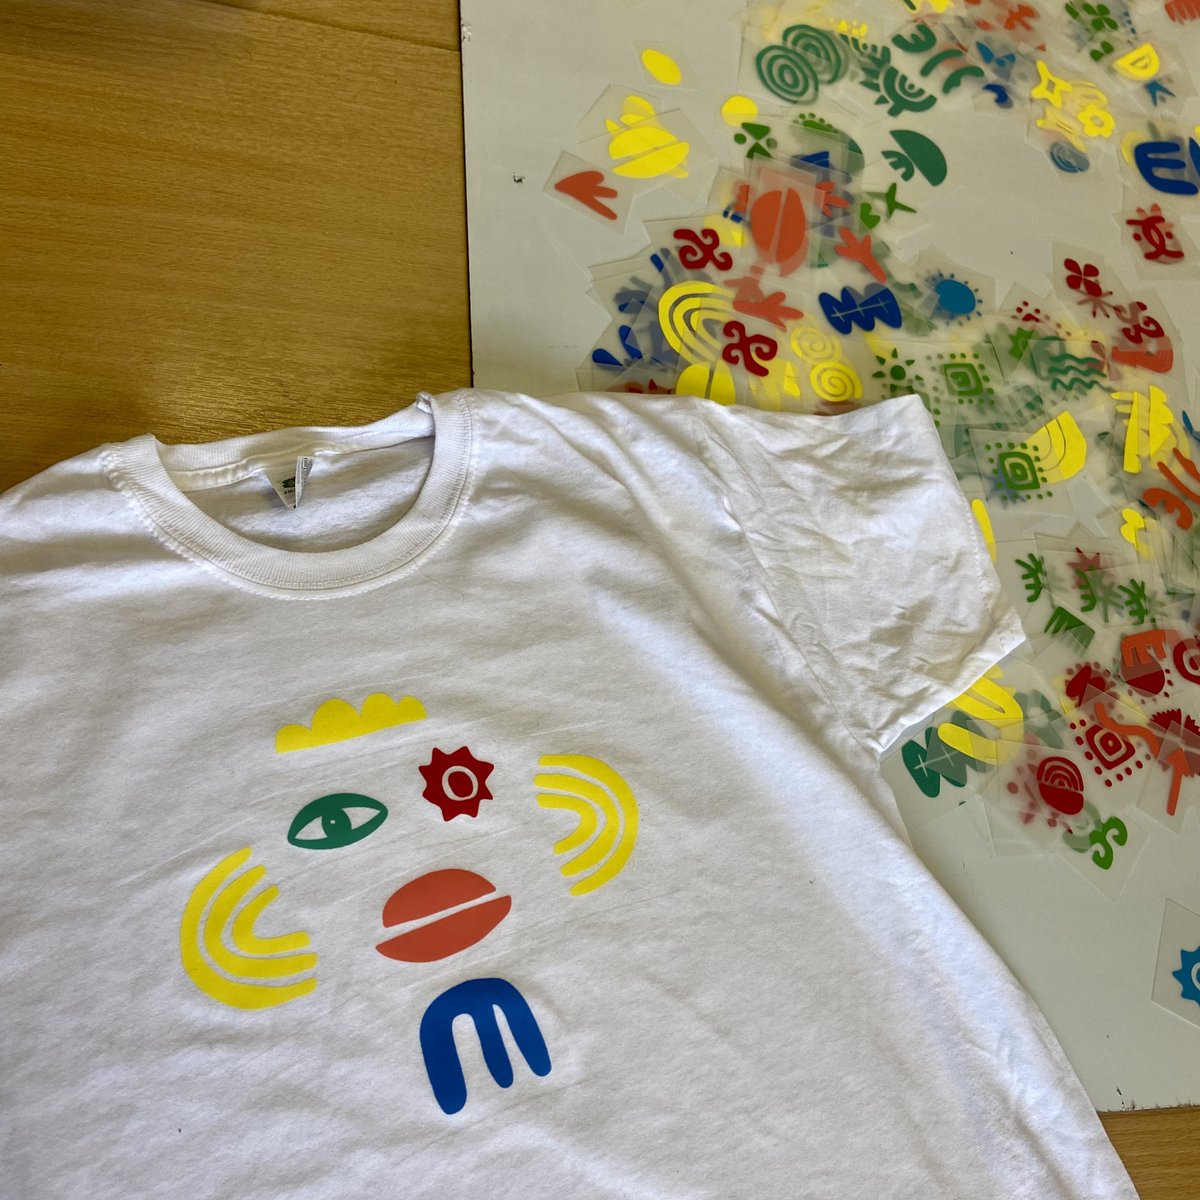 🎨👕 @ThePrinthaus T-SHIRT PRINTING FOR KIDS 🎨👕 Printhaus, who're part of our vibrant Creative Community are hosting a super fun workshop to bring your kids along too! Come away with a brand new printed t-shirt this Thursday 13 April✨ 🔗 theprinthaus.org/printhaus-cour…